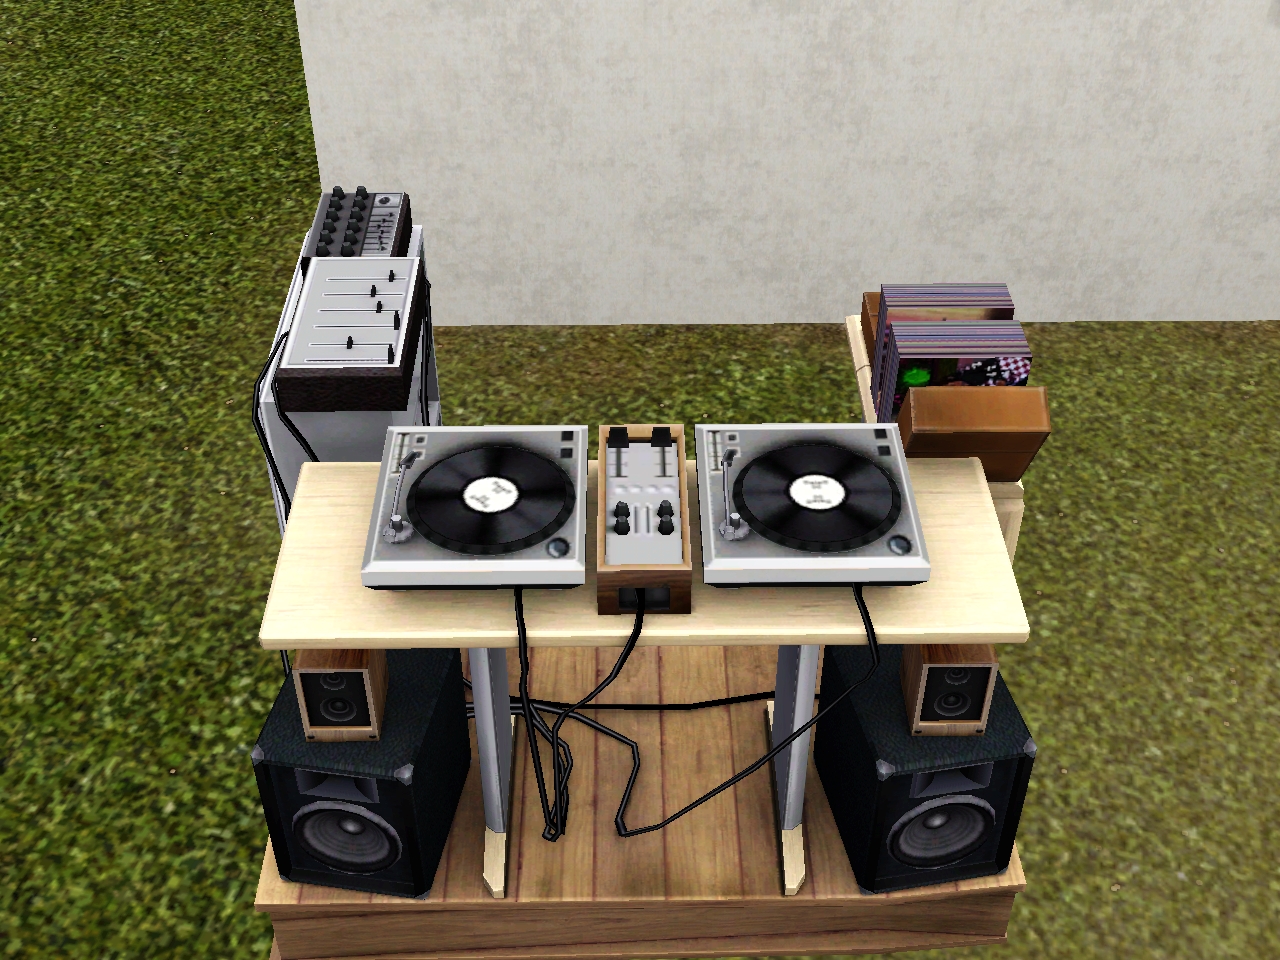 download The Sims DJ